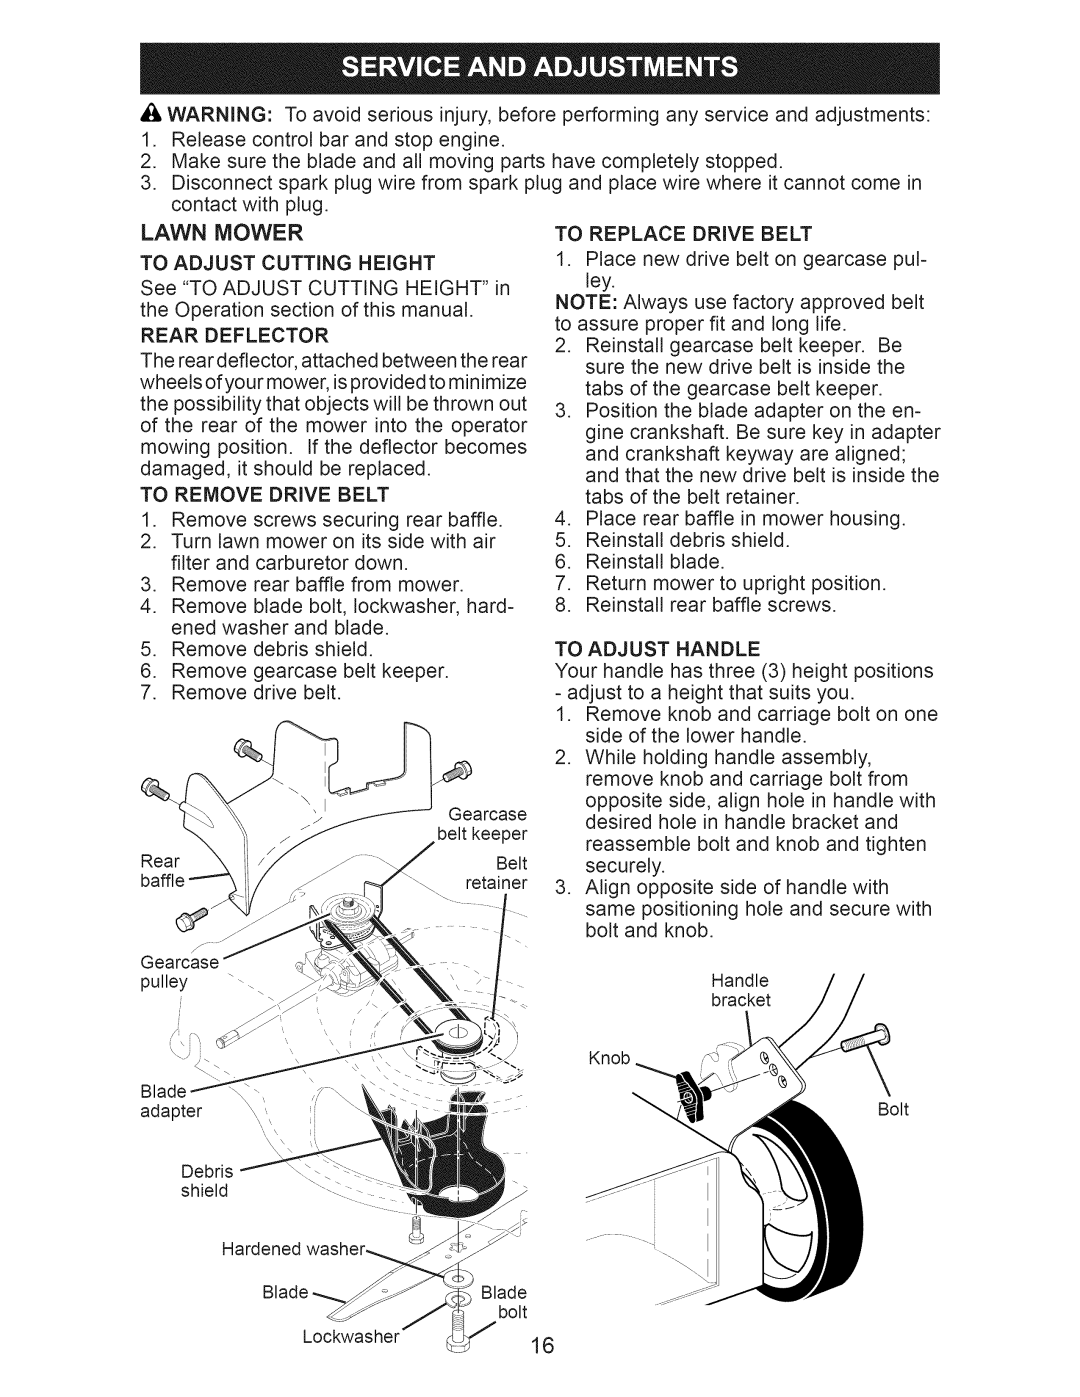 Craftsman 917.374090 manual contact with plug, Lawn Mower 